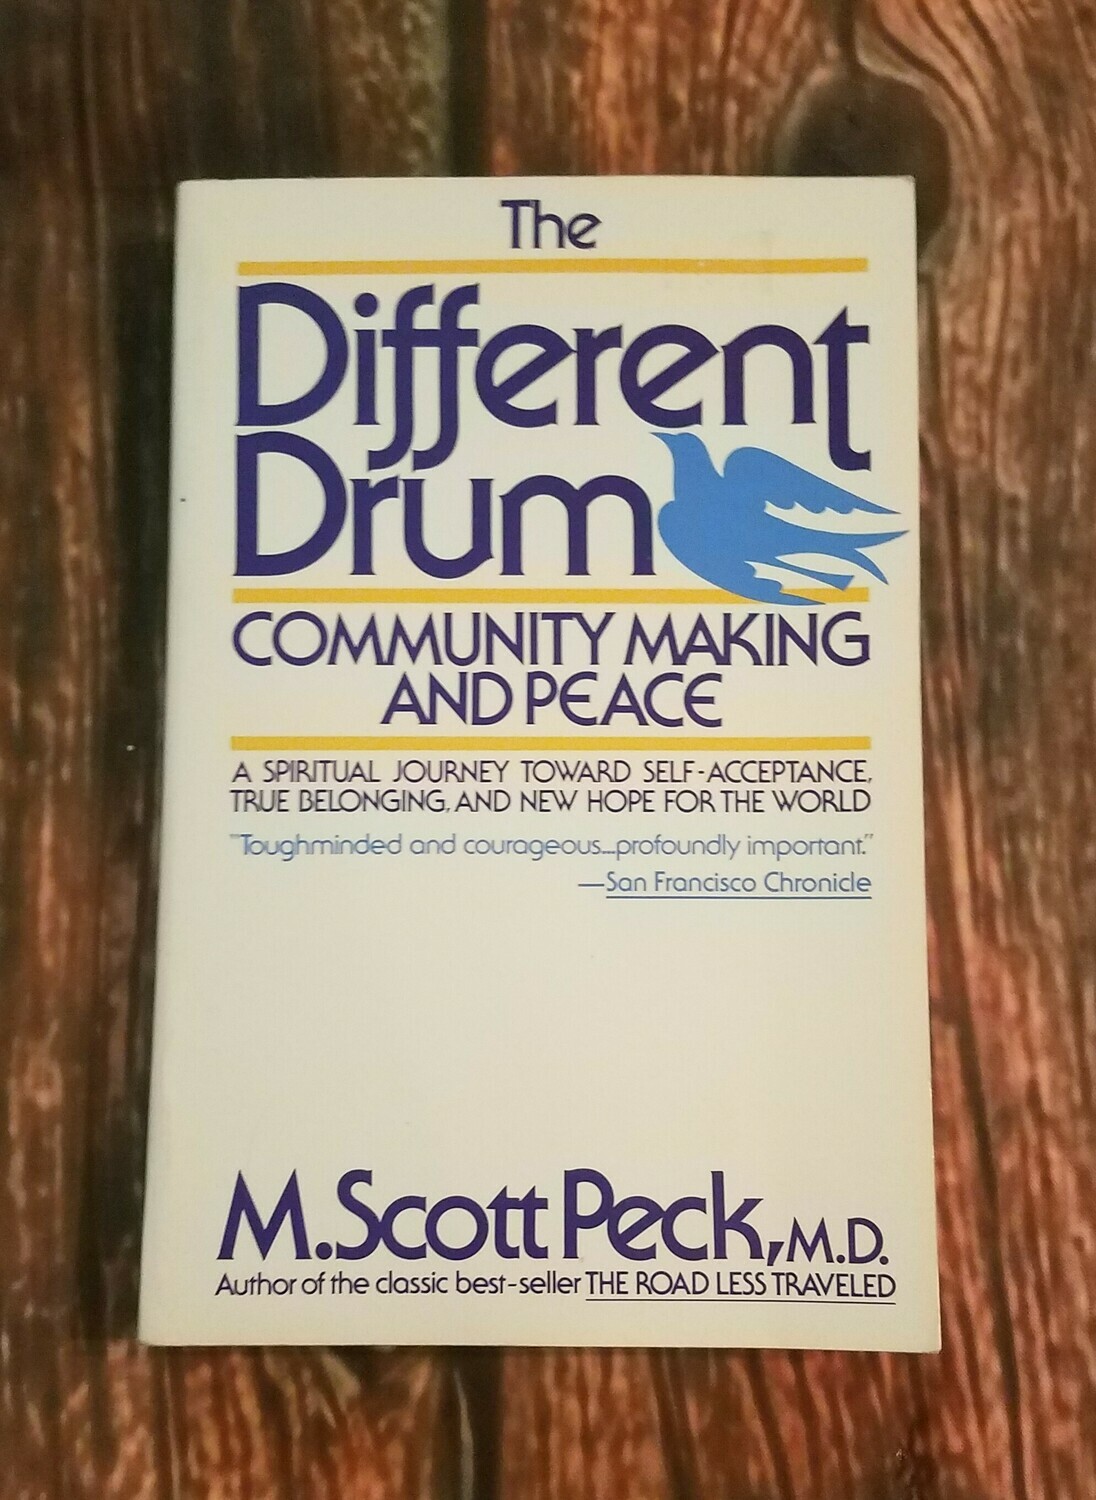 The Different Drum: Community Making and Peace by M. Scott Peck, M.D.